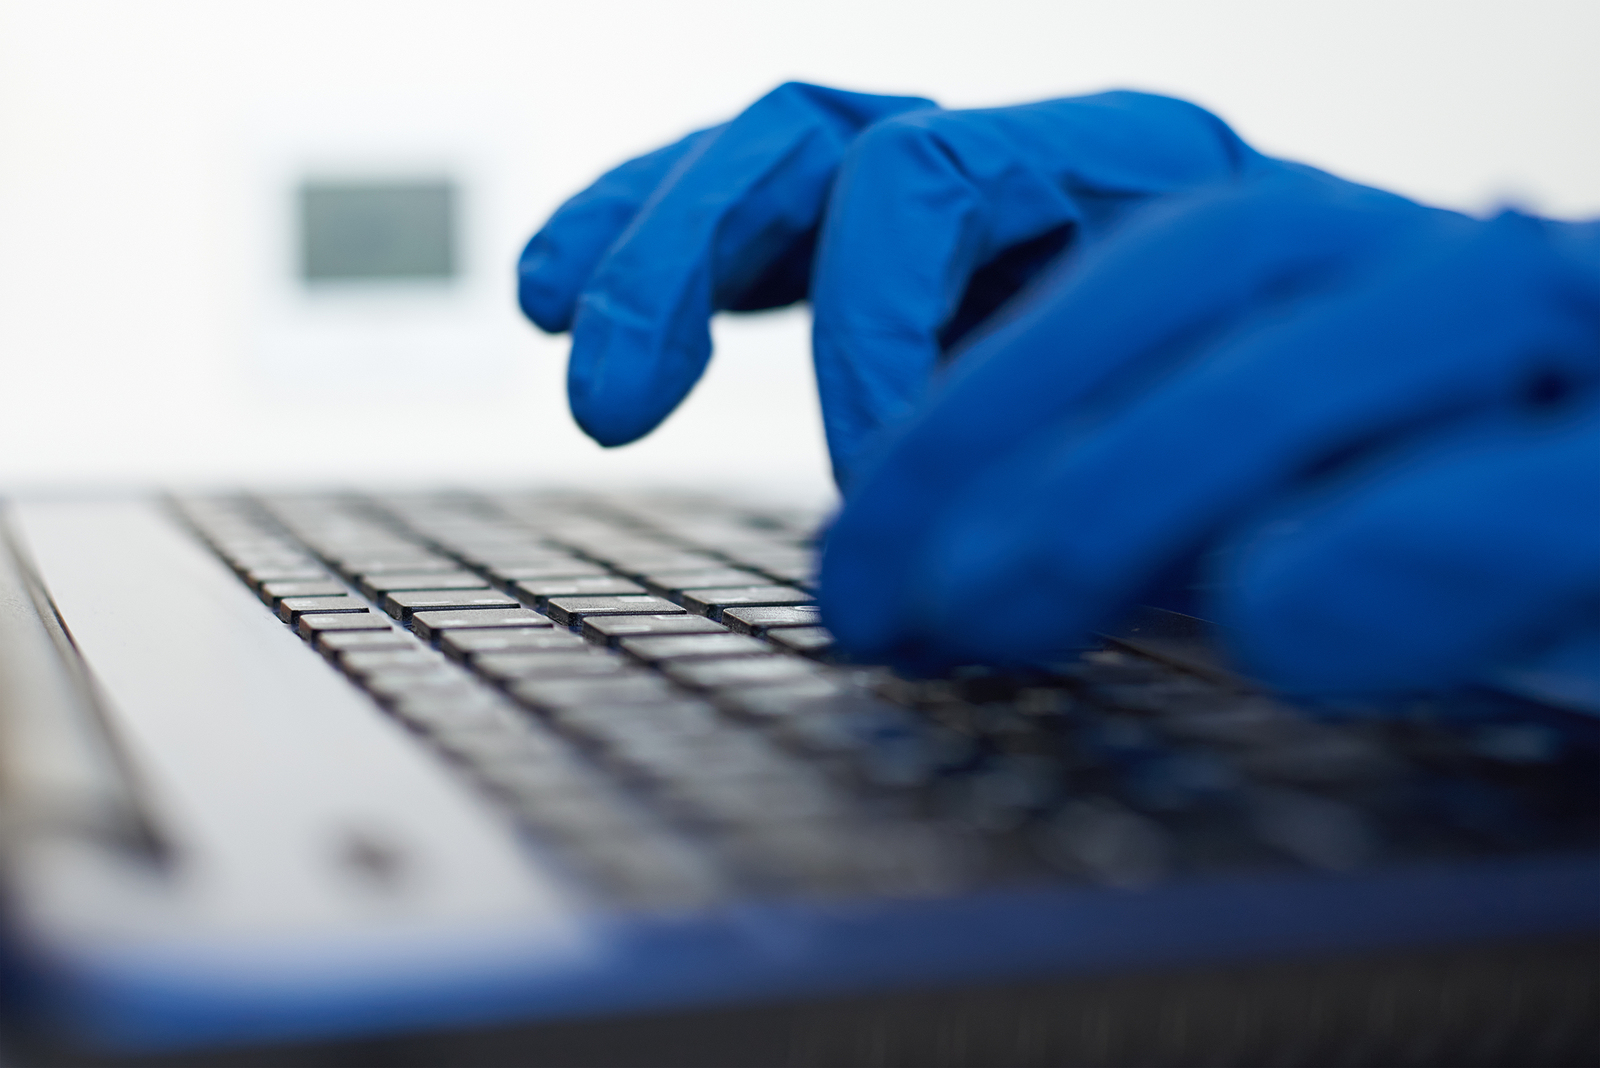 5 Reasons Cyber Hygiene Is Important, Especially for Students